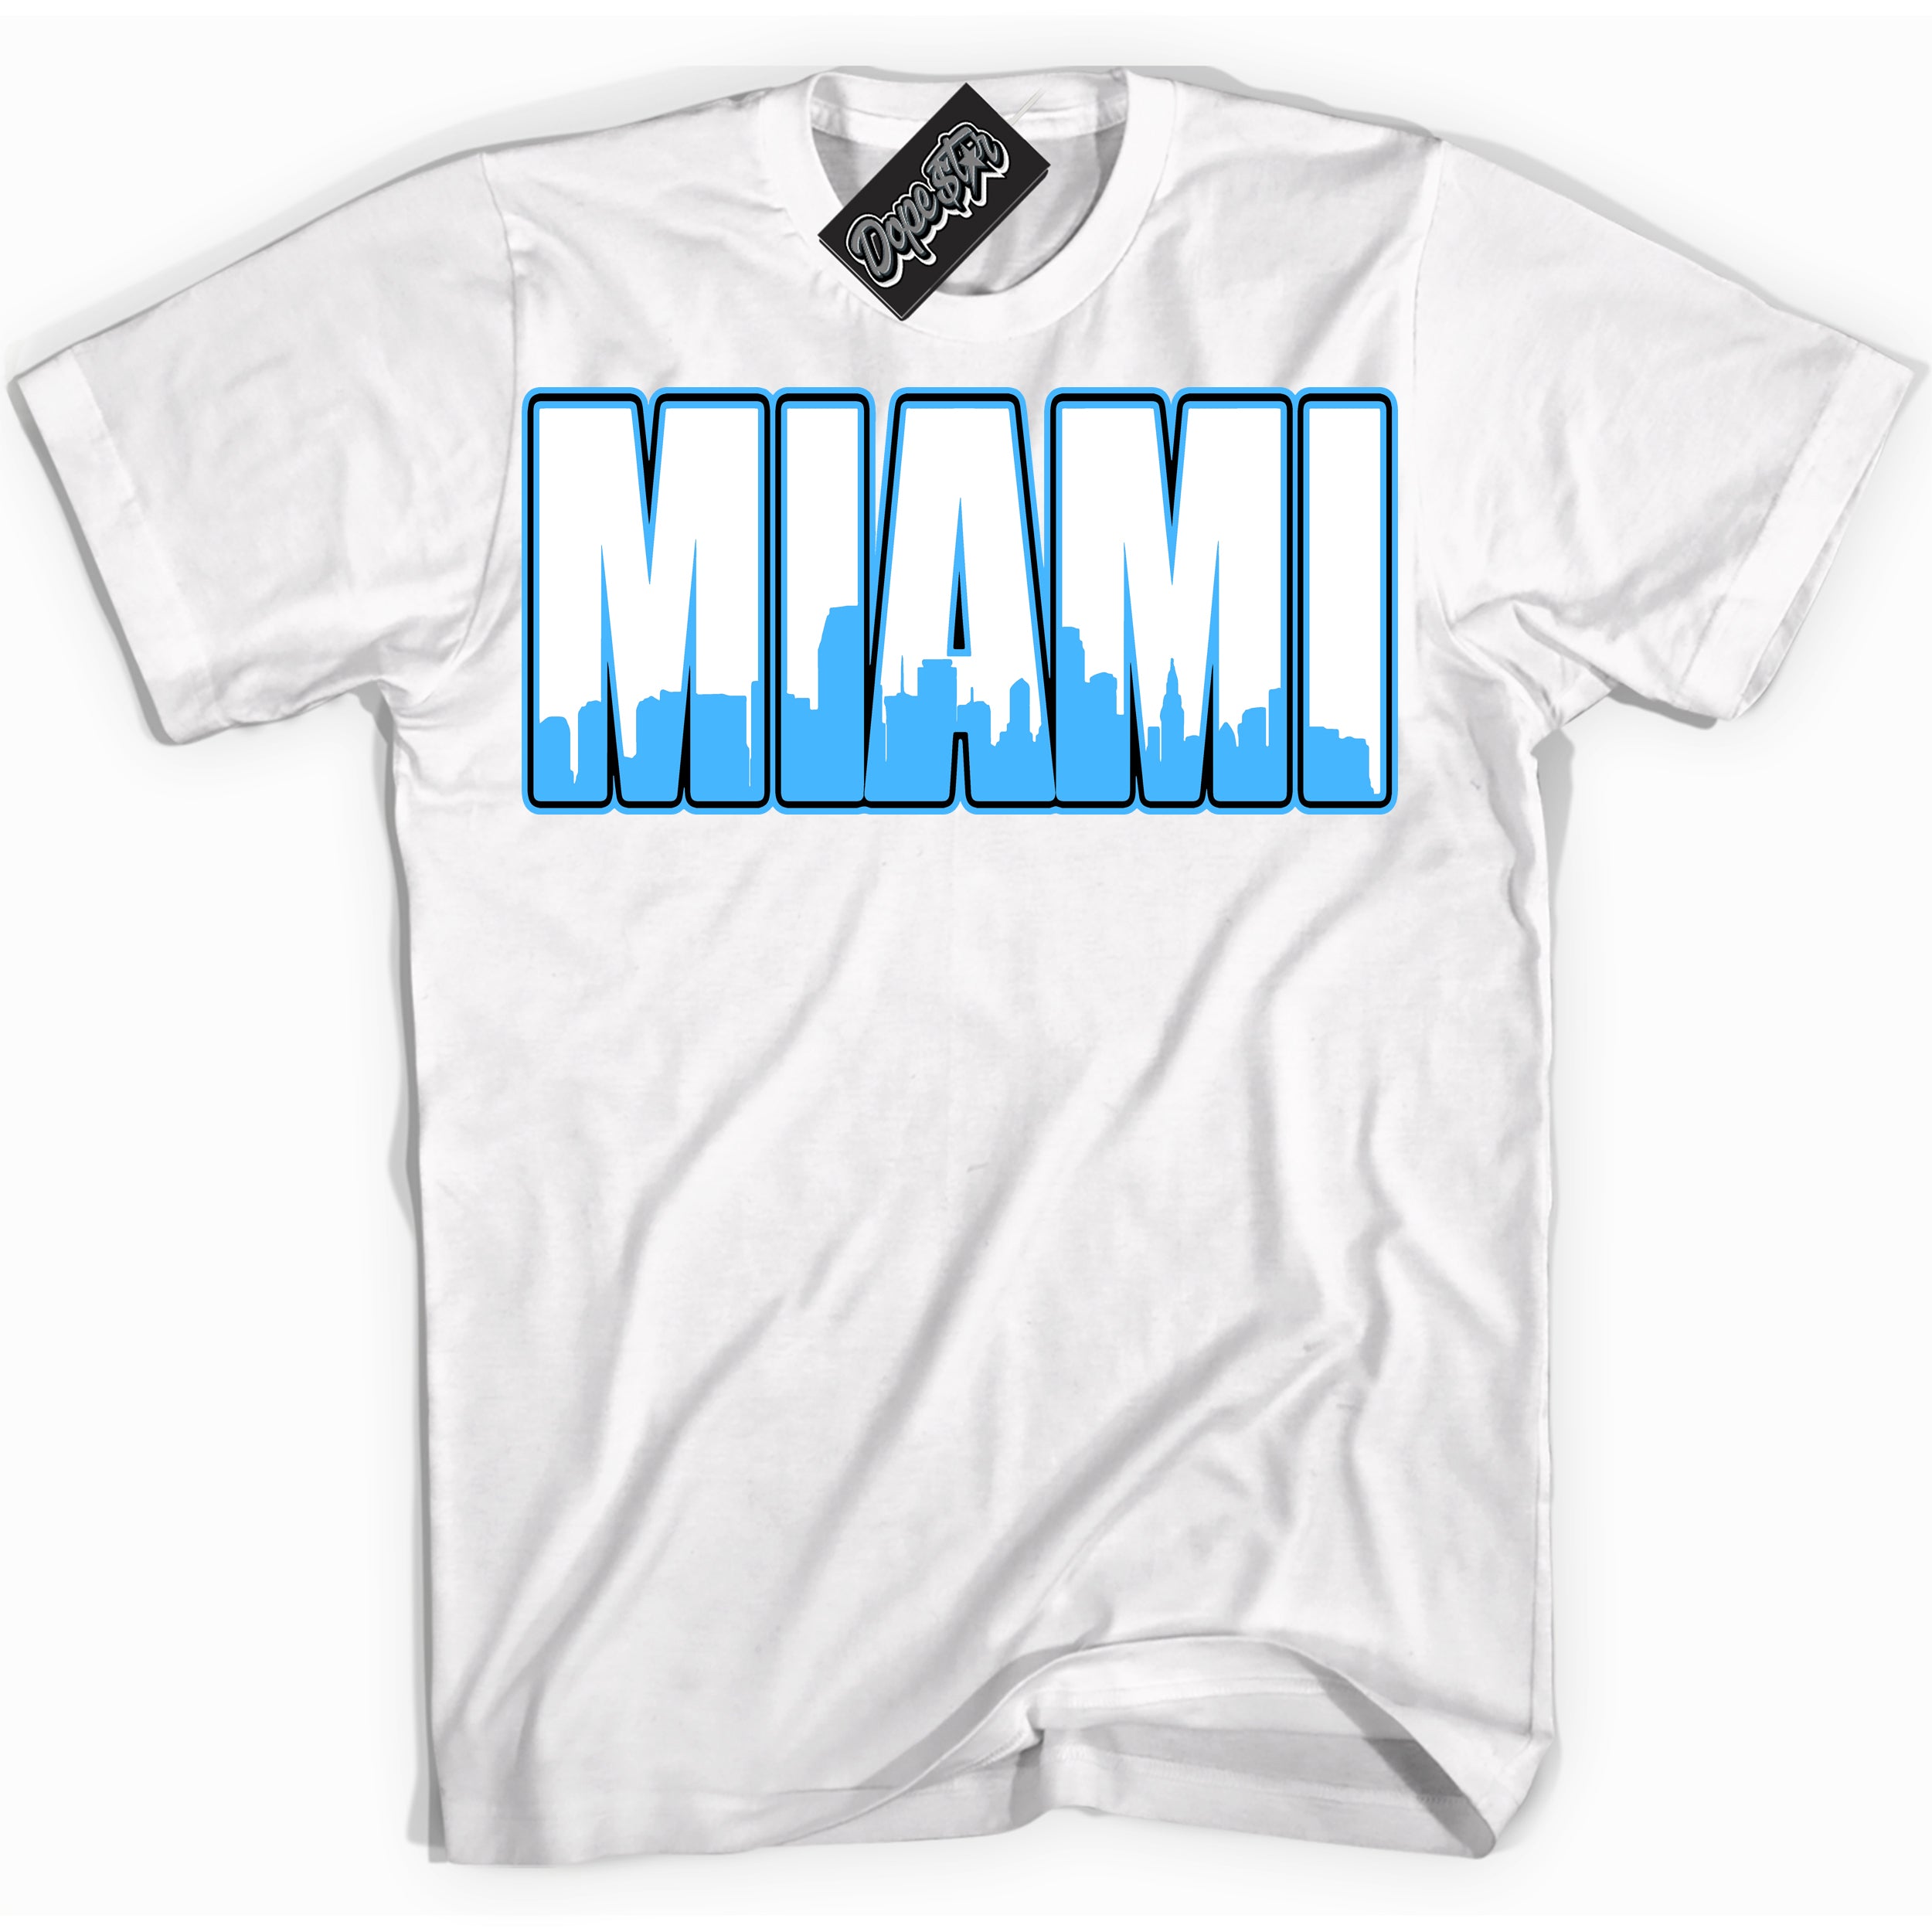 Cool White graphic tee with “ Miami ” design, that perfectly matches Powder Blue 9s sneakers 